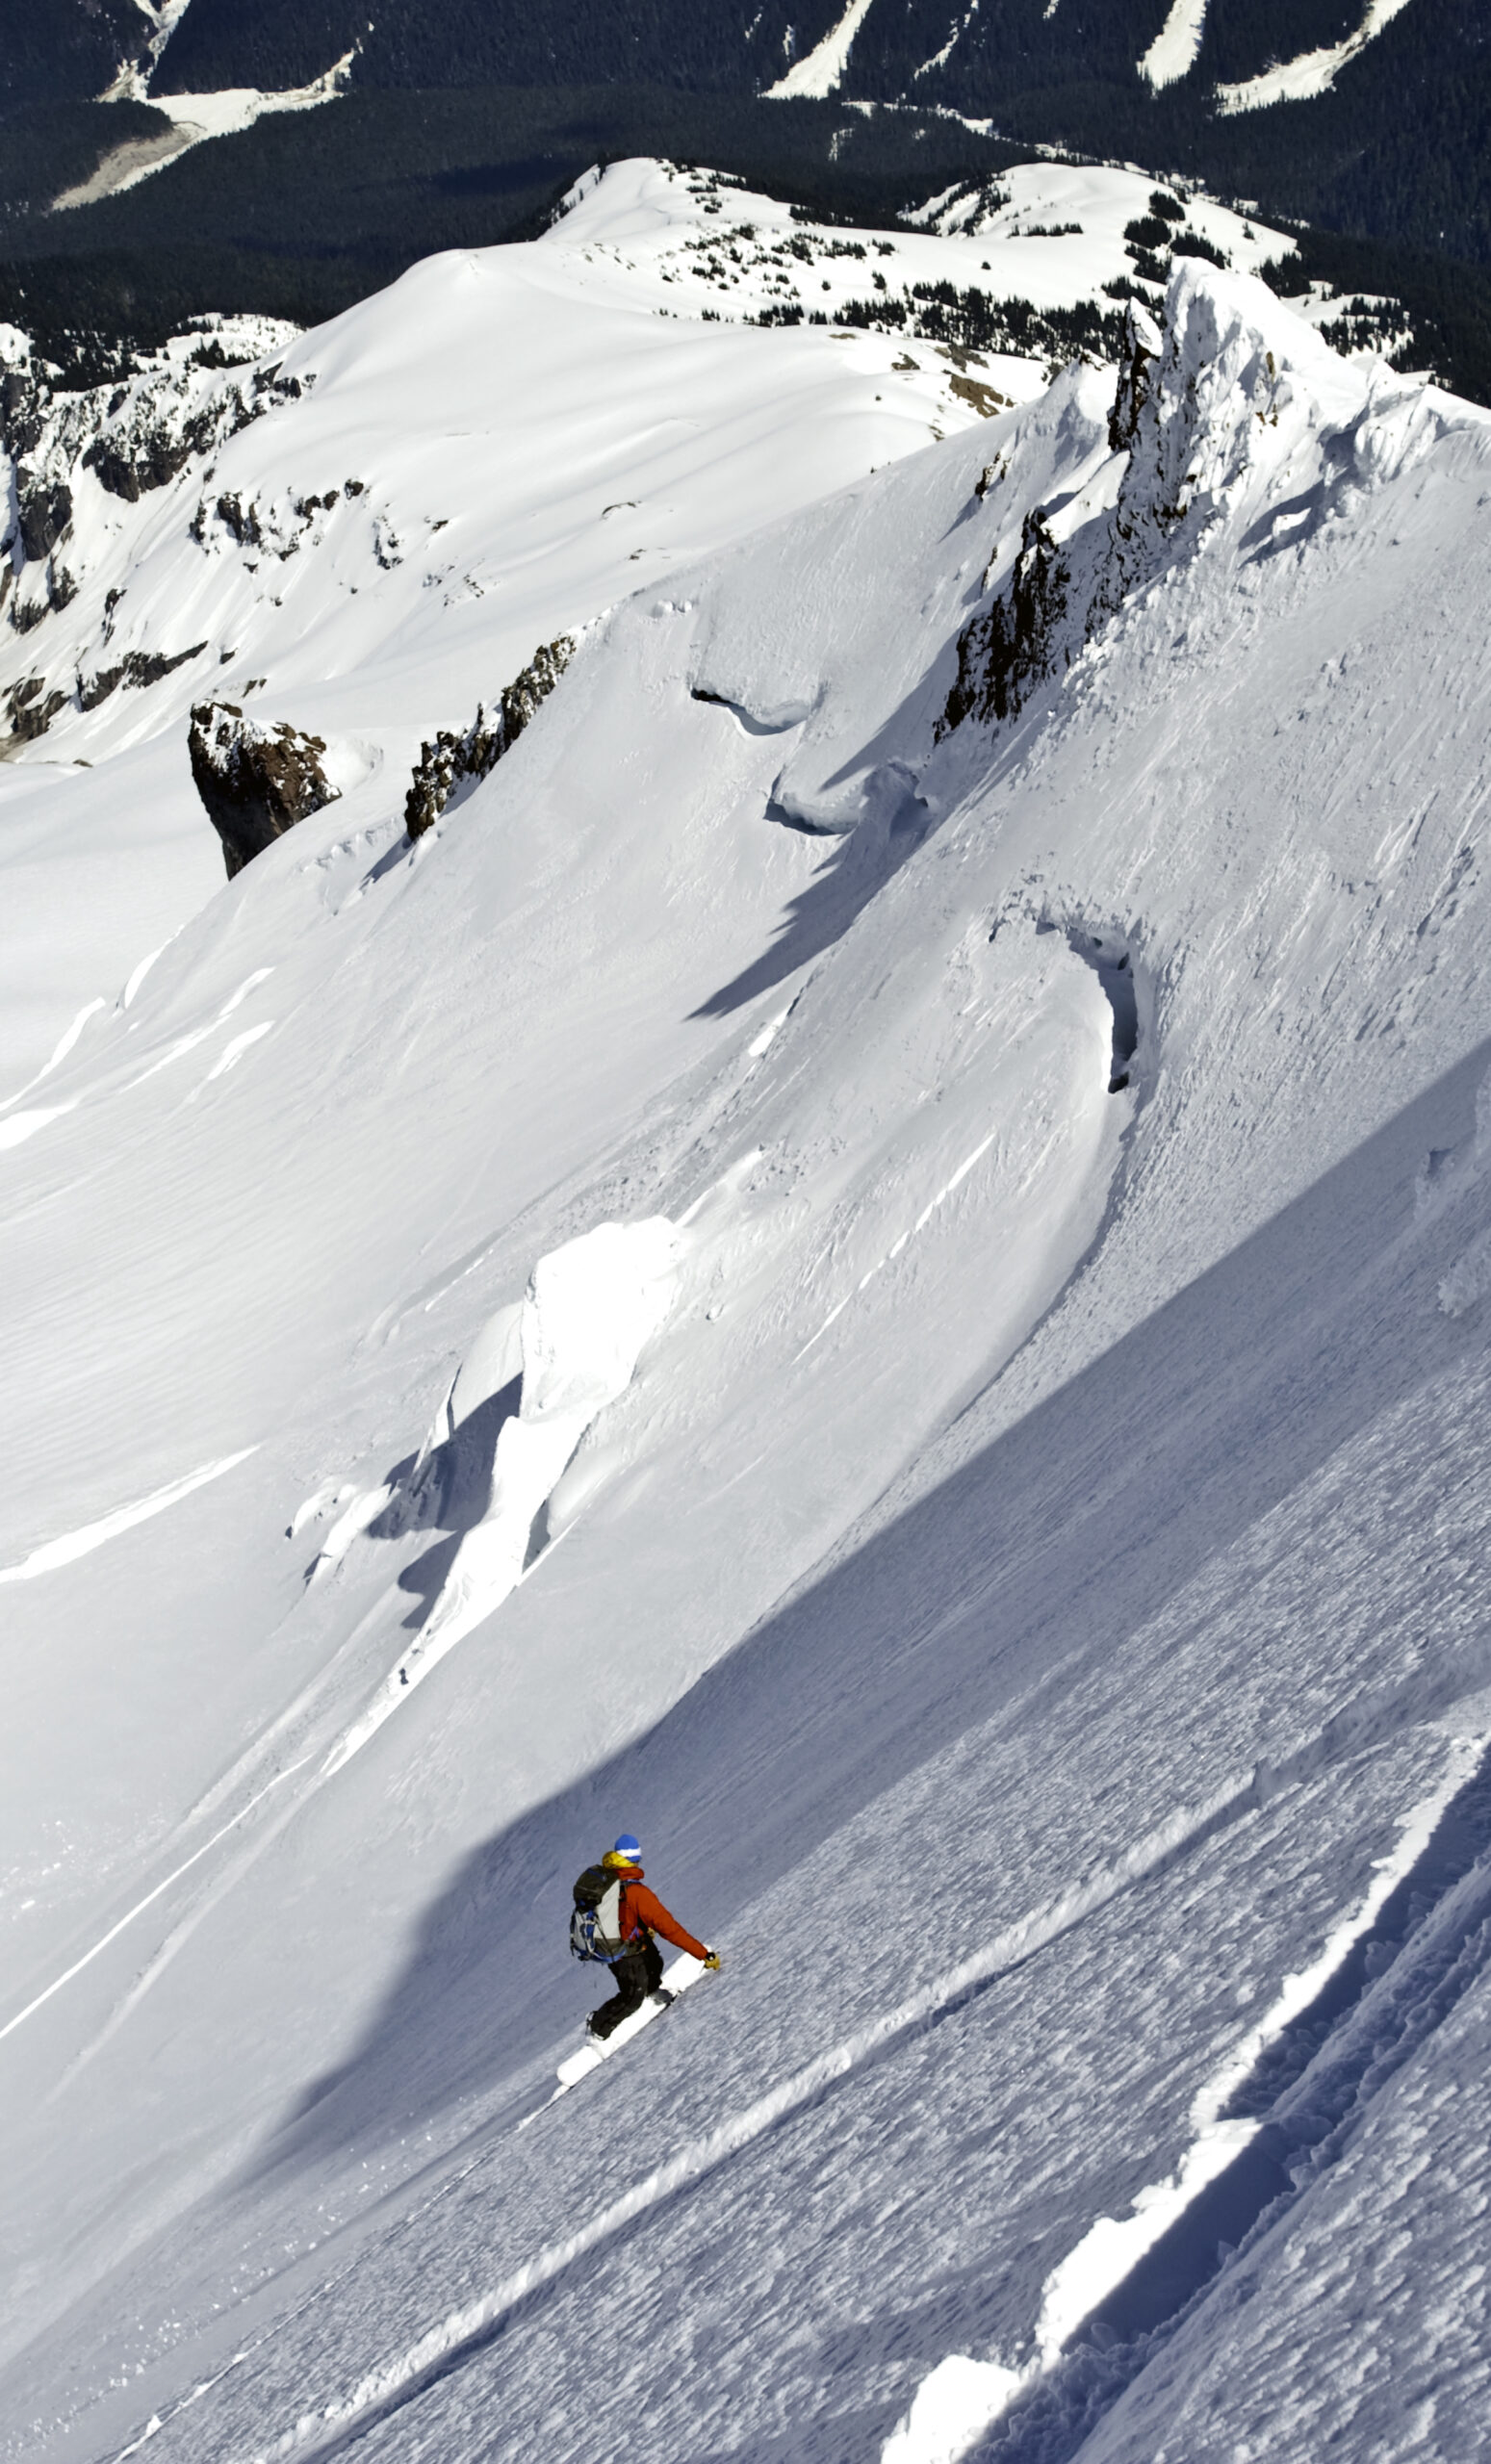 Snowboarding down the upper section of the Chocolate Glacier Headwall on Glacier Peak in Washington State